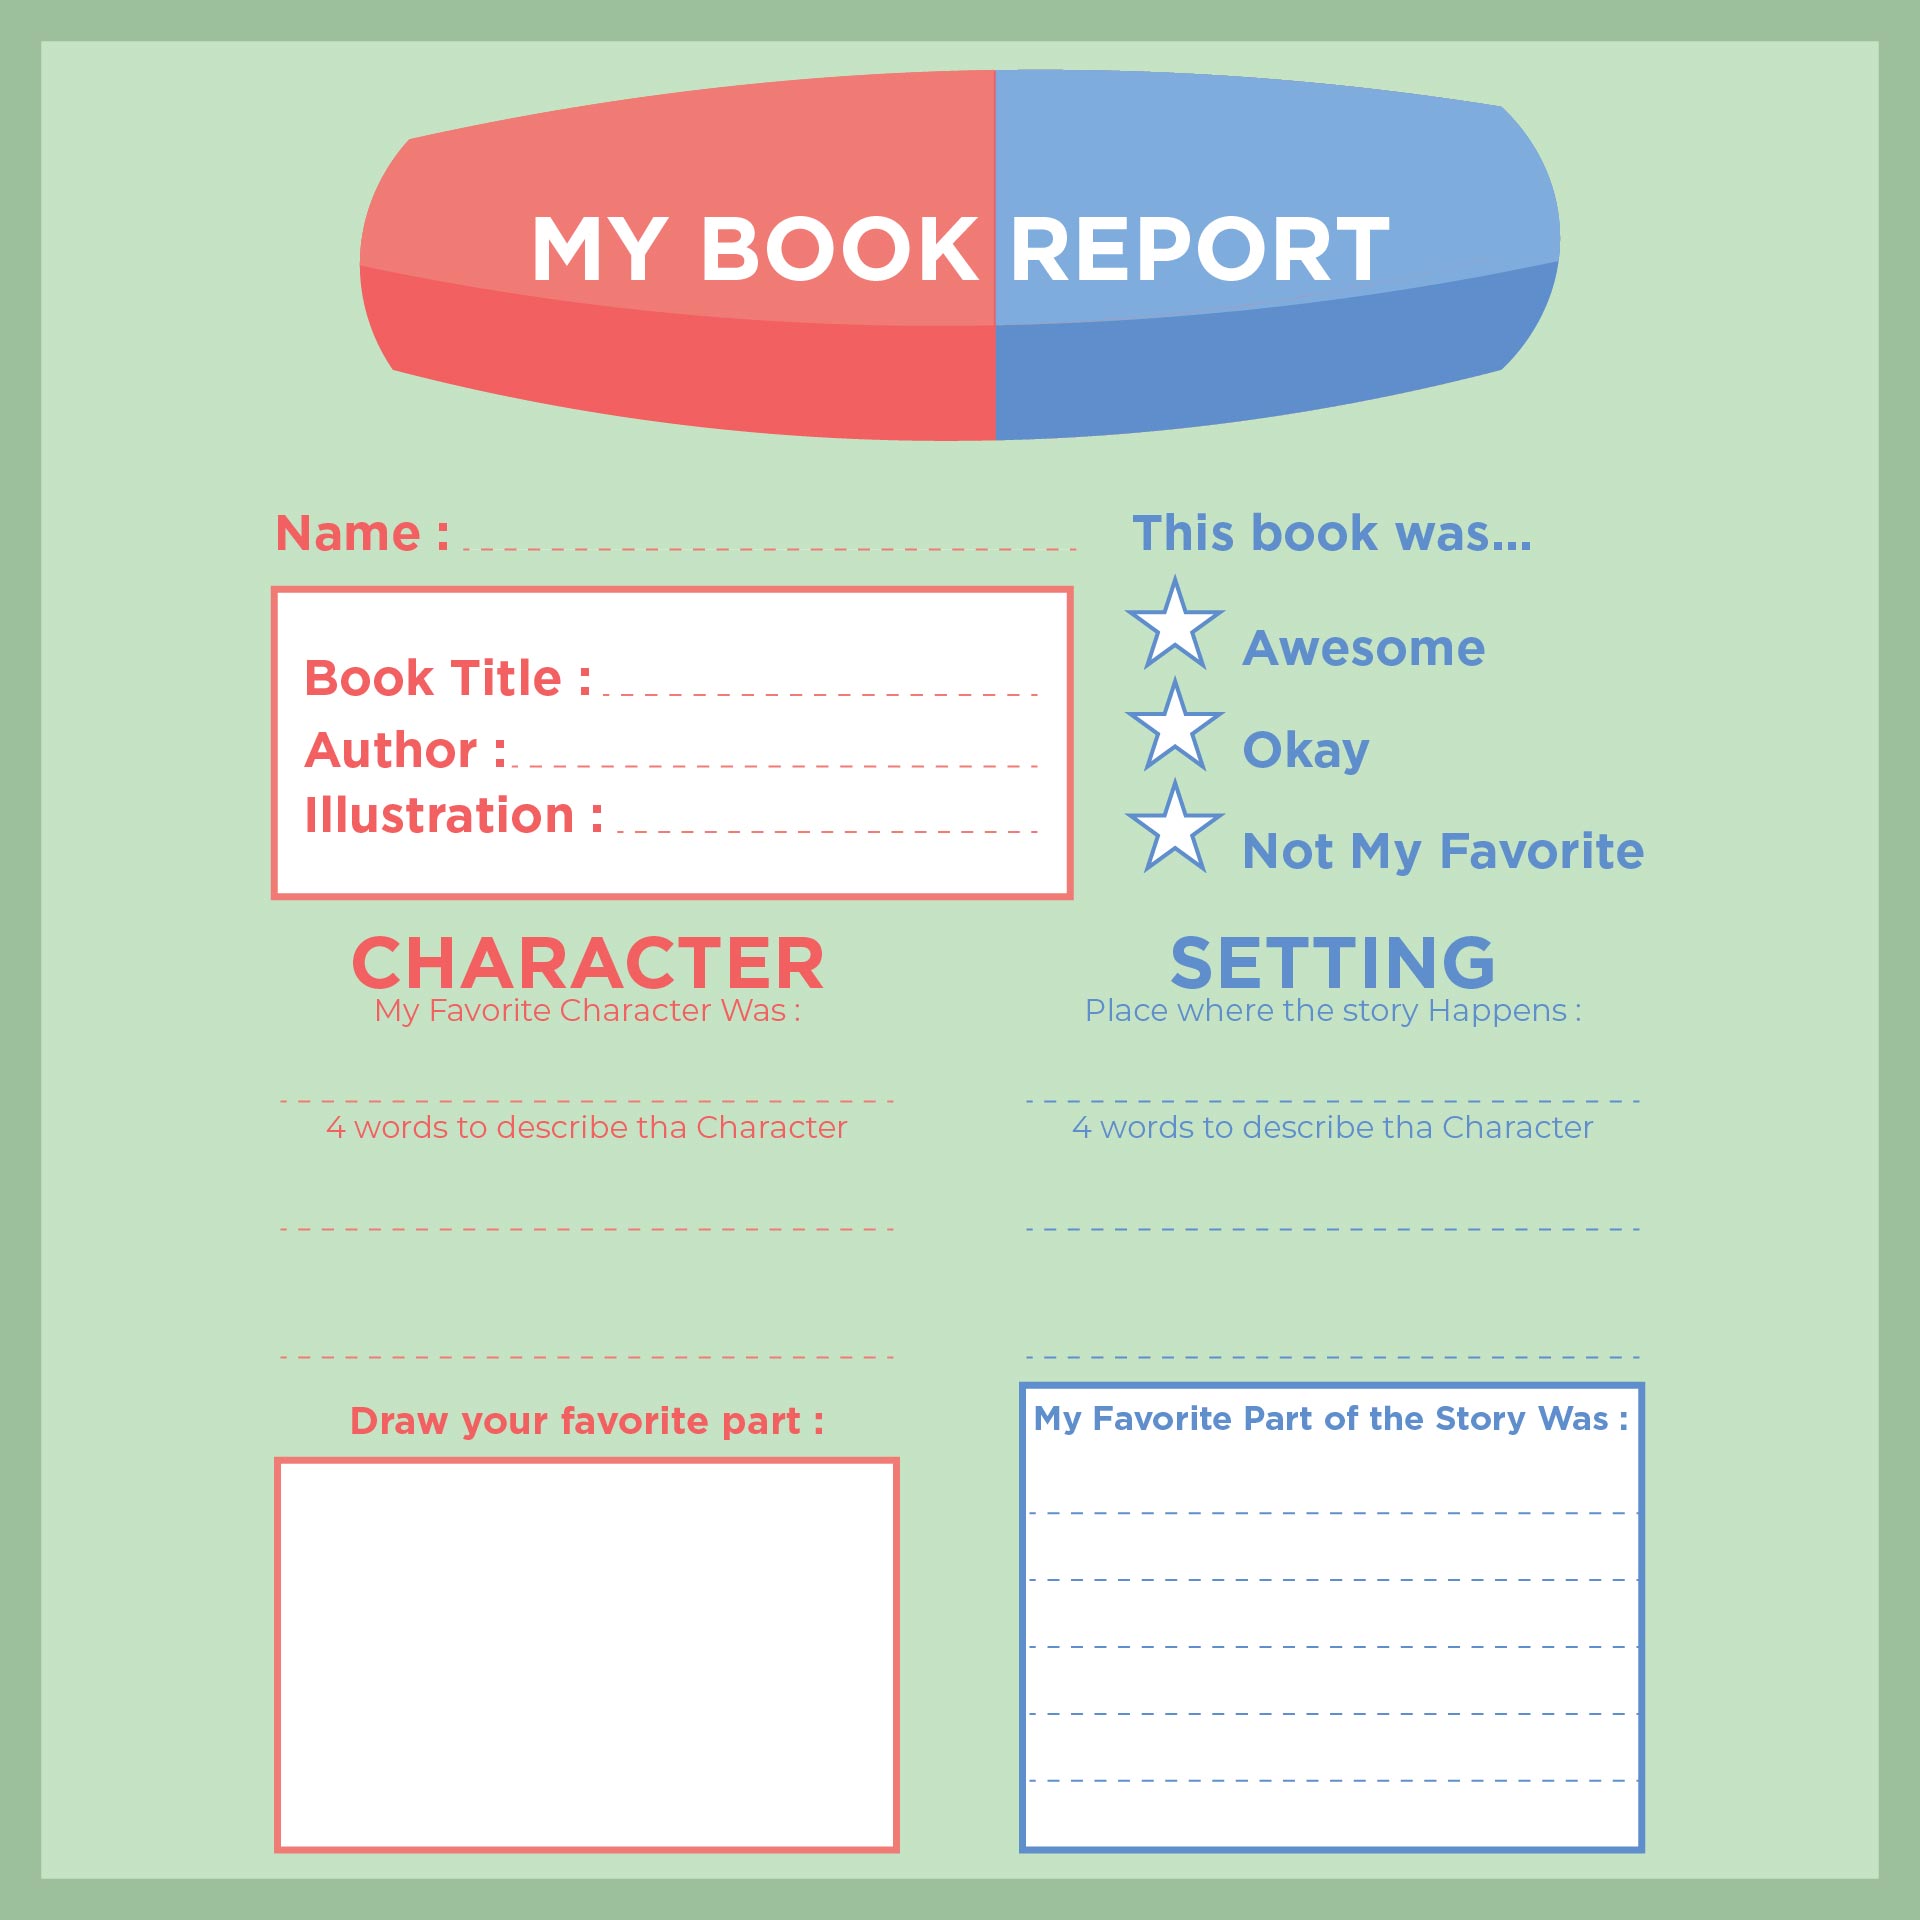 7-best-images-of-free-printable-book-report-forms-printable-book-report-free-printable